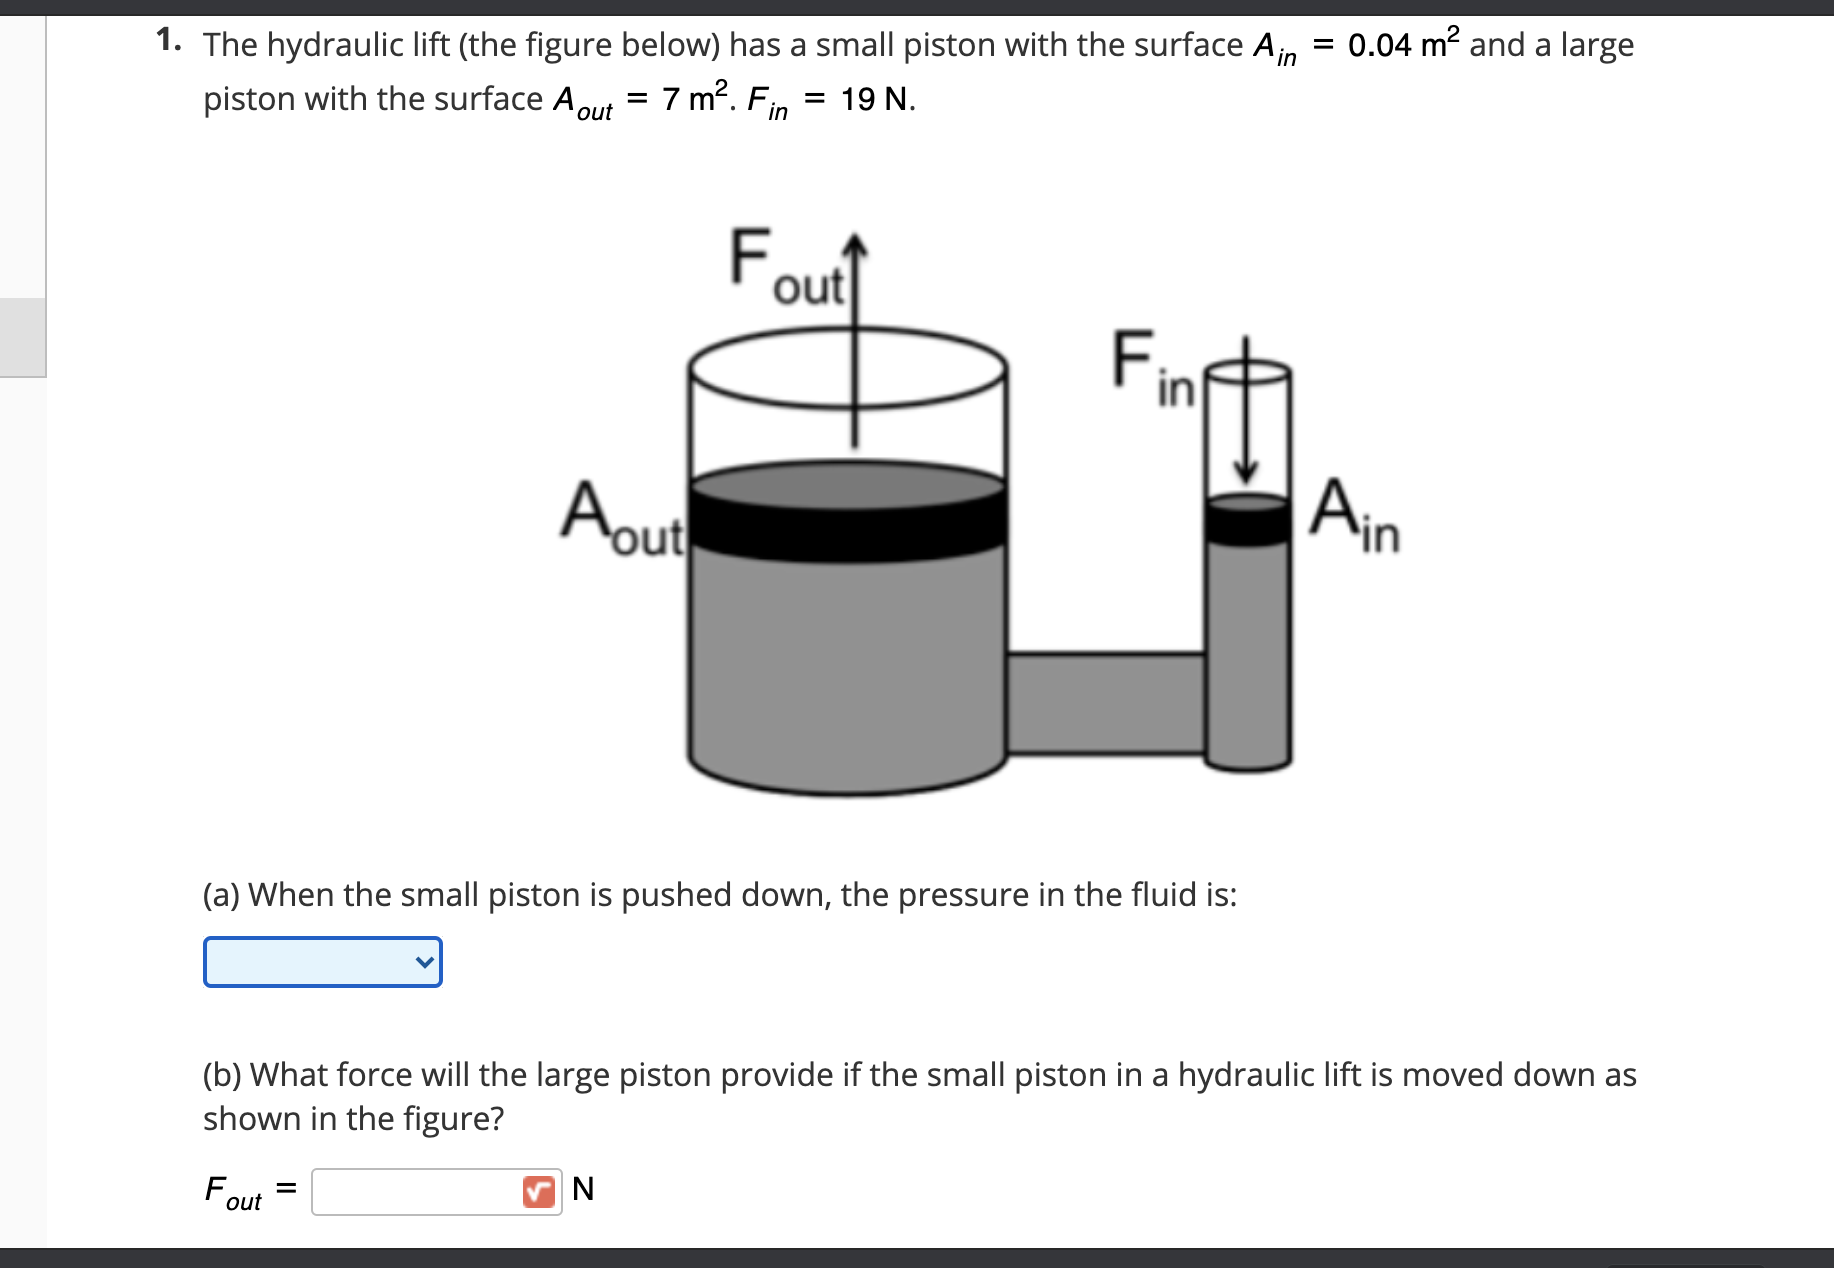 1. The hydraulic lift (the figure below) has a small piston with the surface A,in = 0.04 m? and a large
piston with the surface Aout = 7 m?.
19 N.
in
F.
out
F
Aout
Ain
(a) When the small piston is pushed down, the pressure in the fluid is:
(b) What force will the large piston provide if the small piston in a hydraulic lift is moved down as
shown in the figure?
F,
N
out
in
